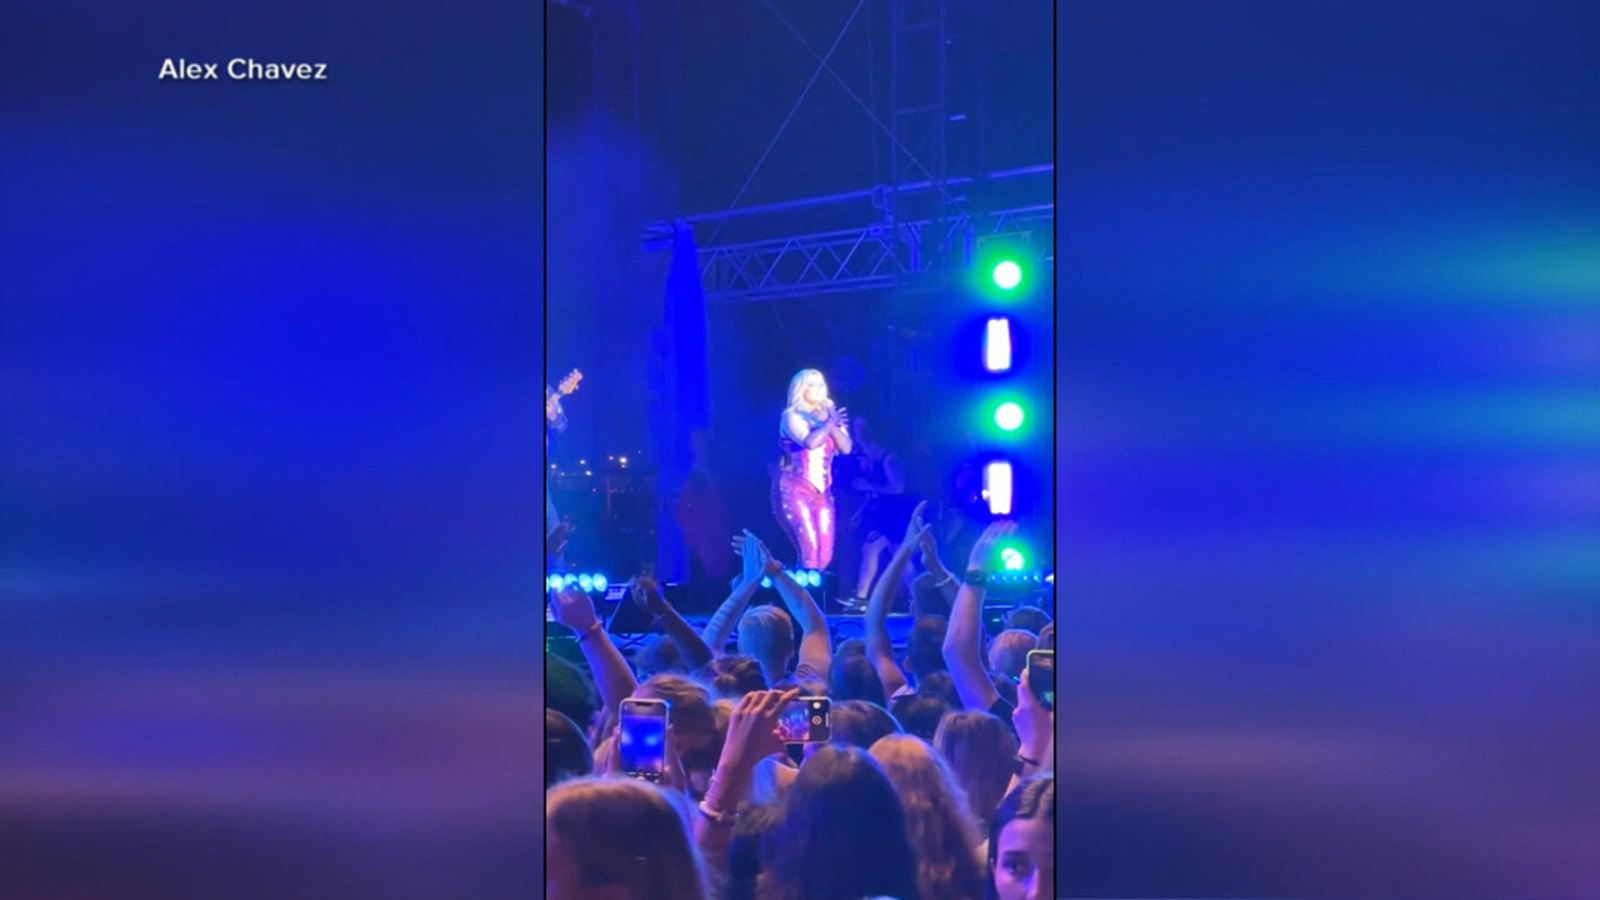 Concertgoer injures Bebe Rexha, shocking incident caught on camera in NYC concert. 16